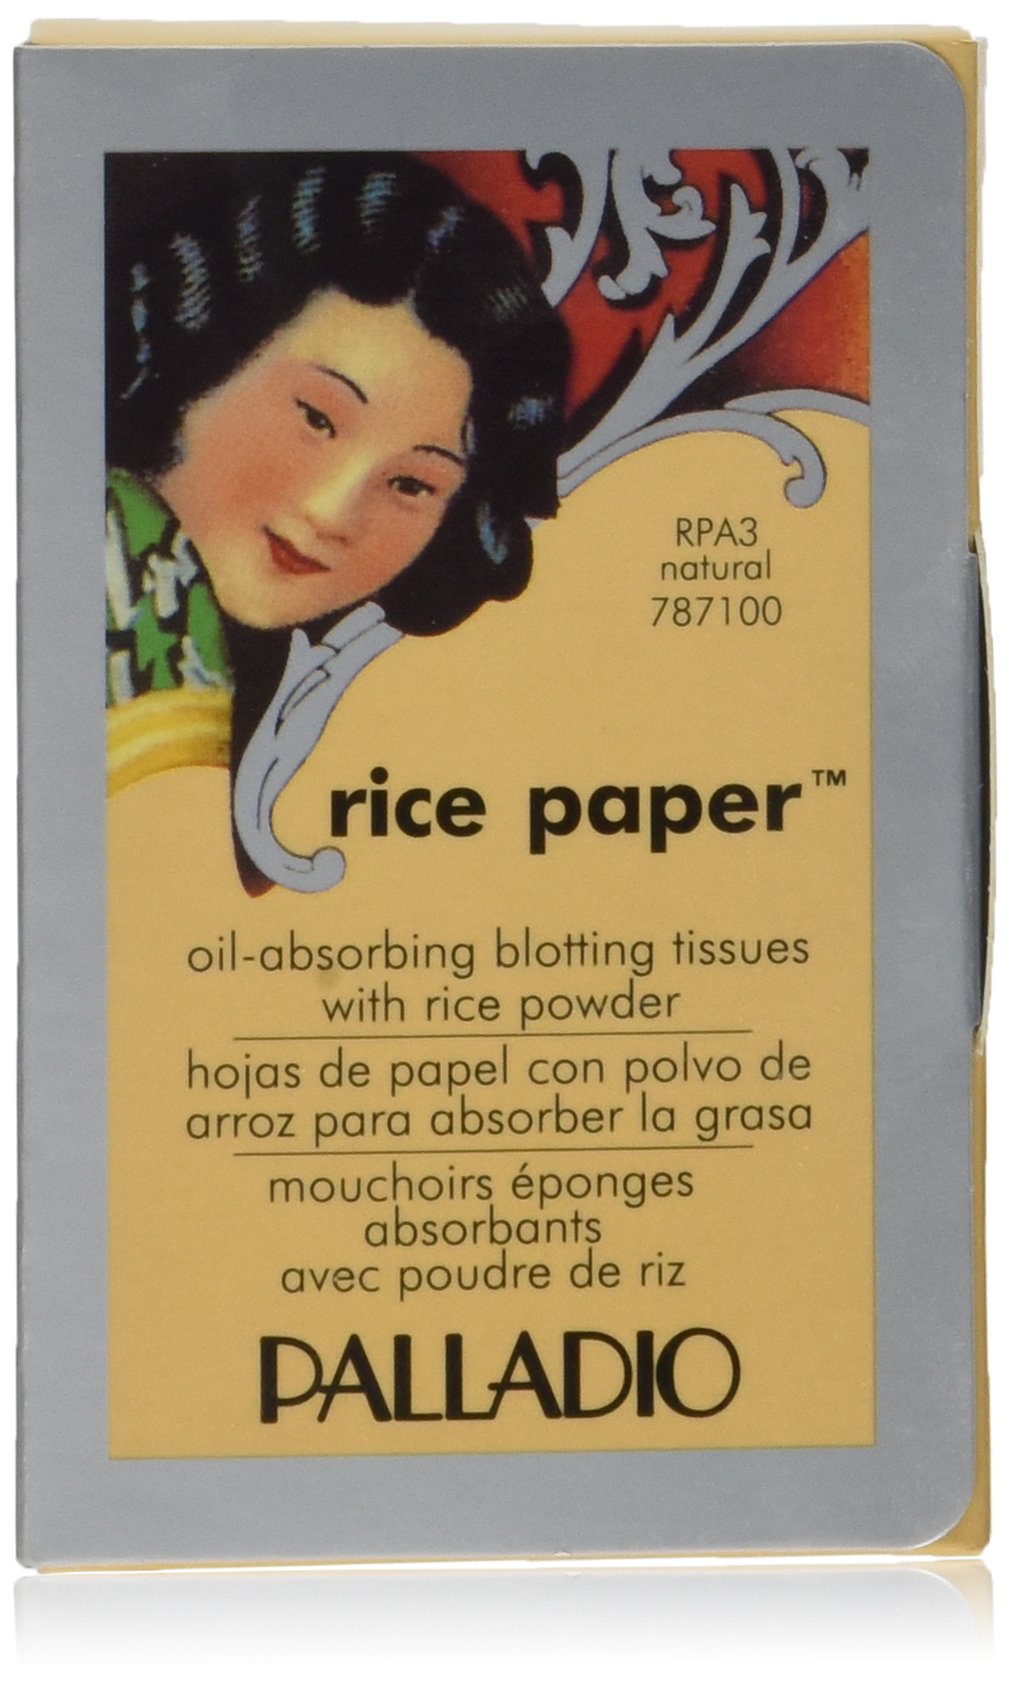 Palladio Rice Paper Facial Tissues for Oily Skin, Face Blotting Sheets Made from Natural Rice, Oil Absorbing Paper with Rice Powder, 2 Sided, Instant Results, Natural, 40 Count, Pack of 1